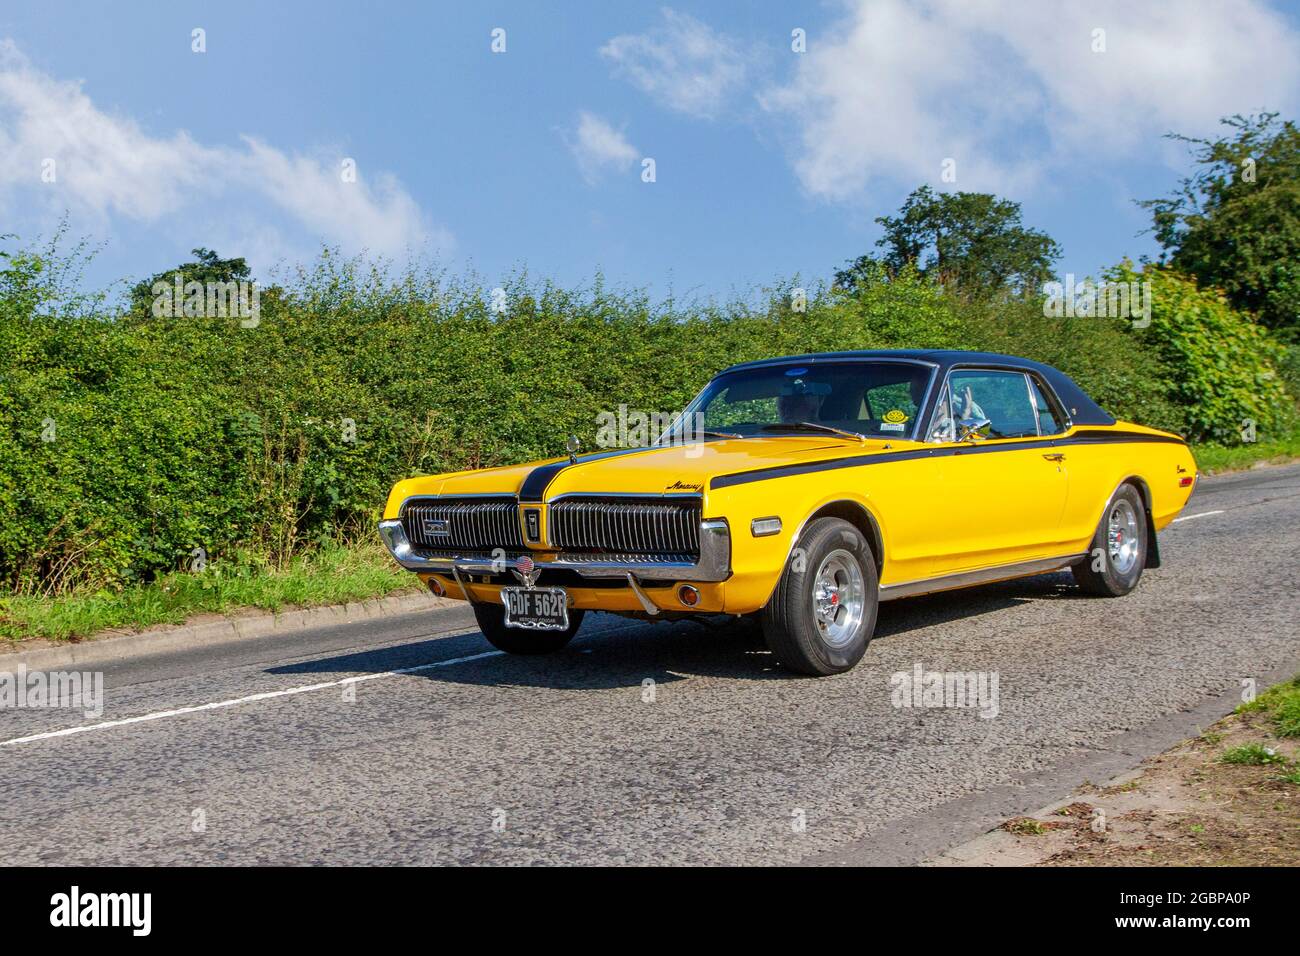 1967 60s sixties yellow American Mercury Cougar 2dr pony car  4949cc petrol muscle car en-route to Capesthorne Hall classic July car show, Cheshire, UK Stock Photo